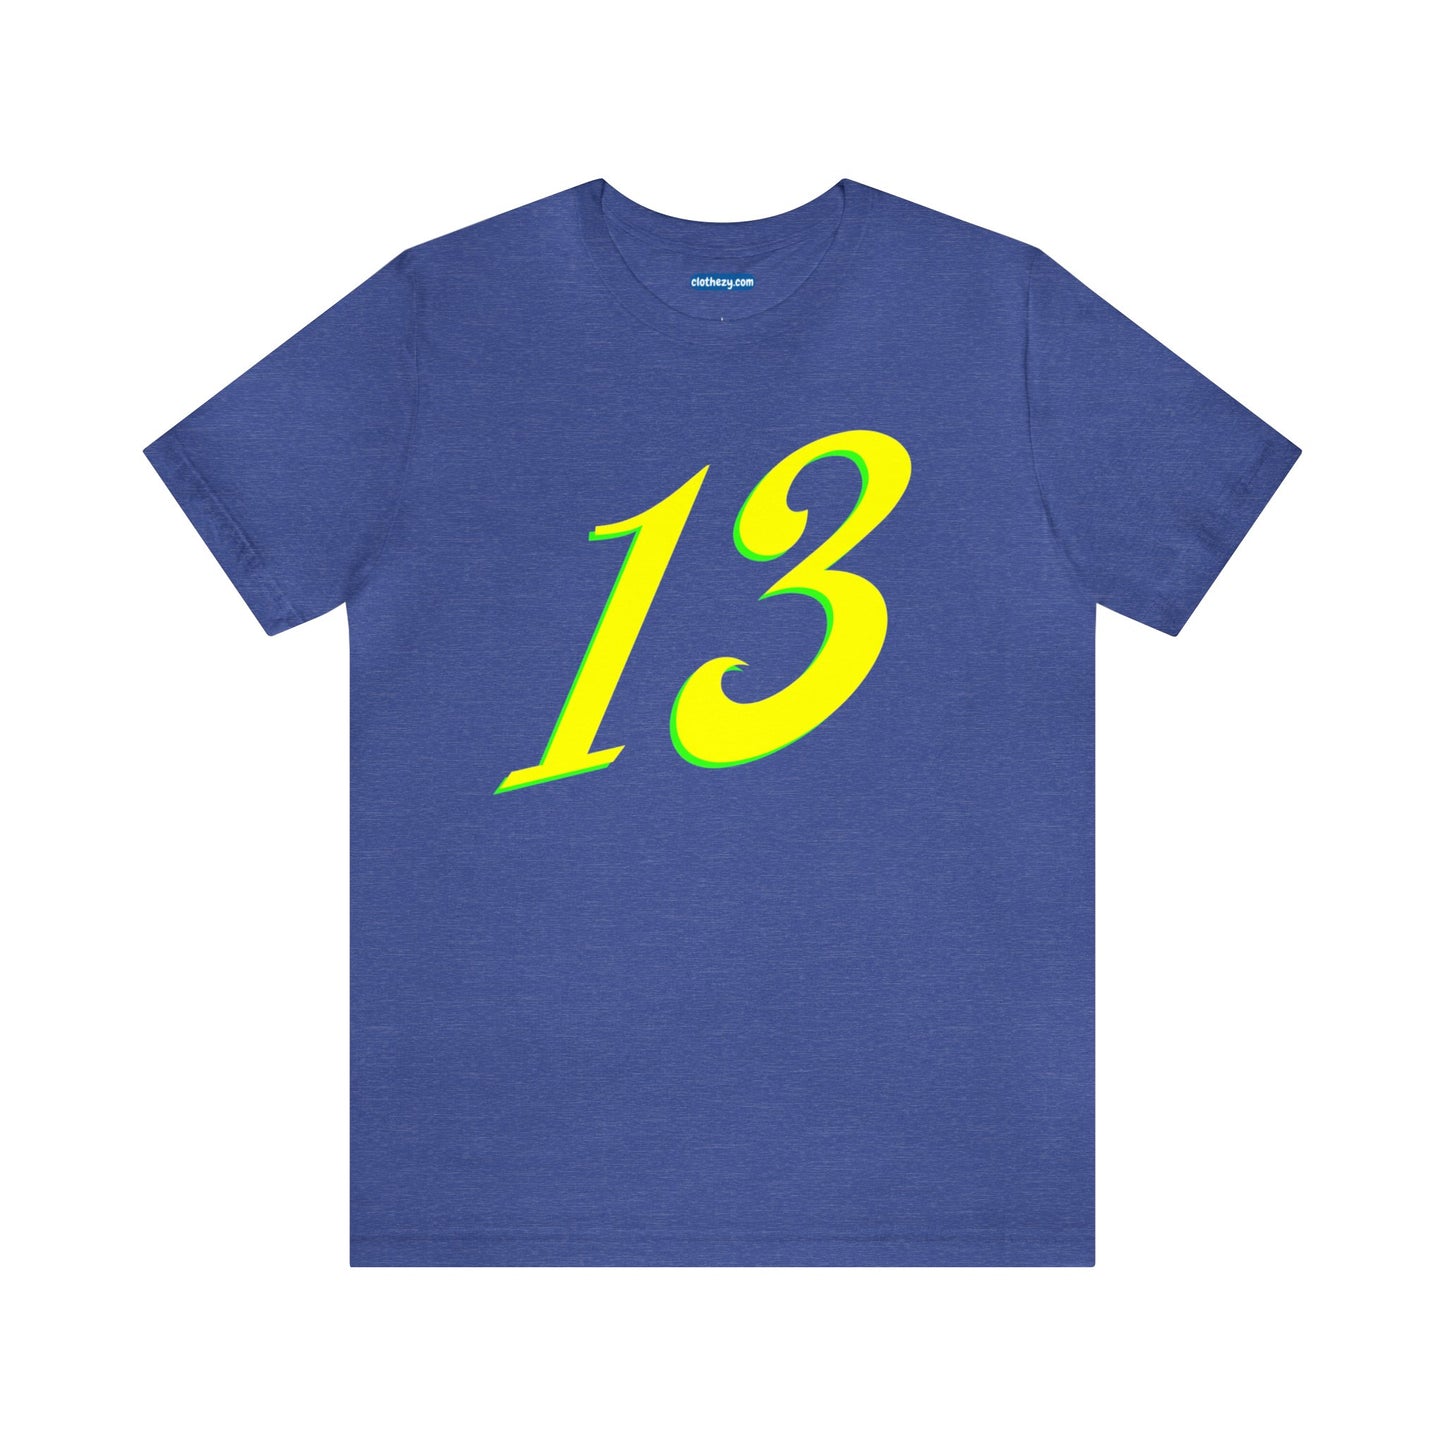 Number 13 Design - Soft Cotton Tee for birthdays and celebrations, Gift for friends and family, Multiple Options by clothezy.com in Navy Size Small - Buy Now